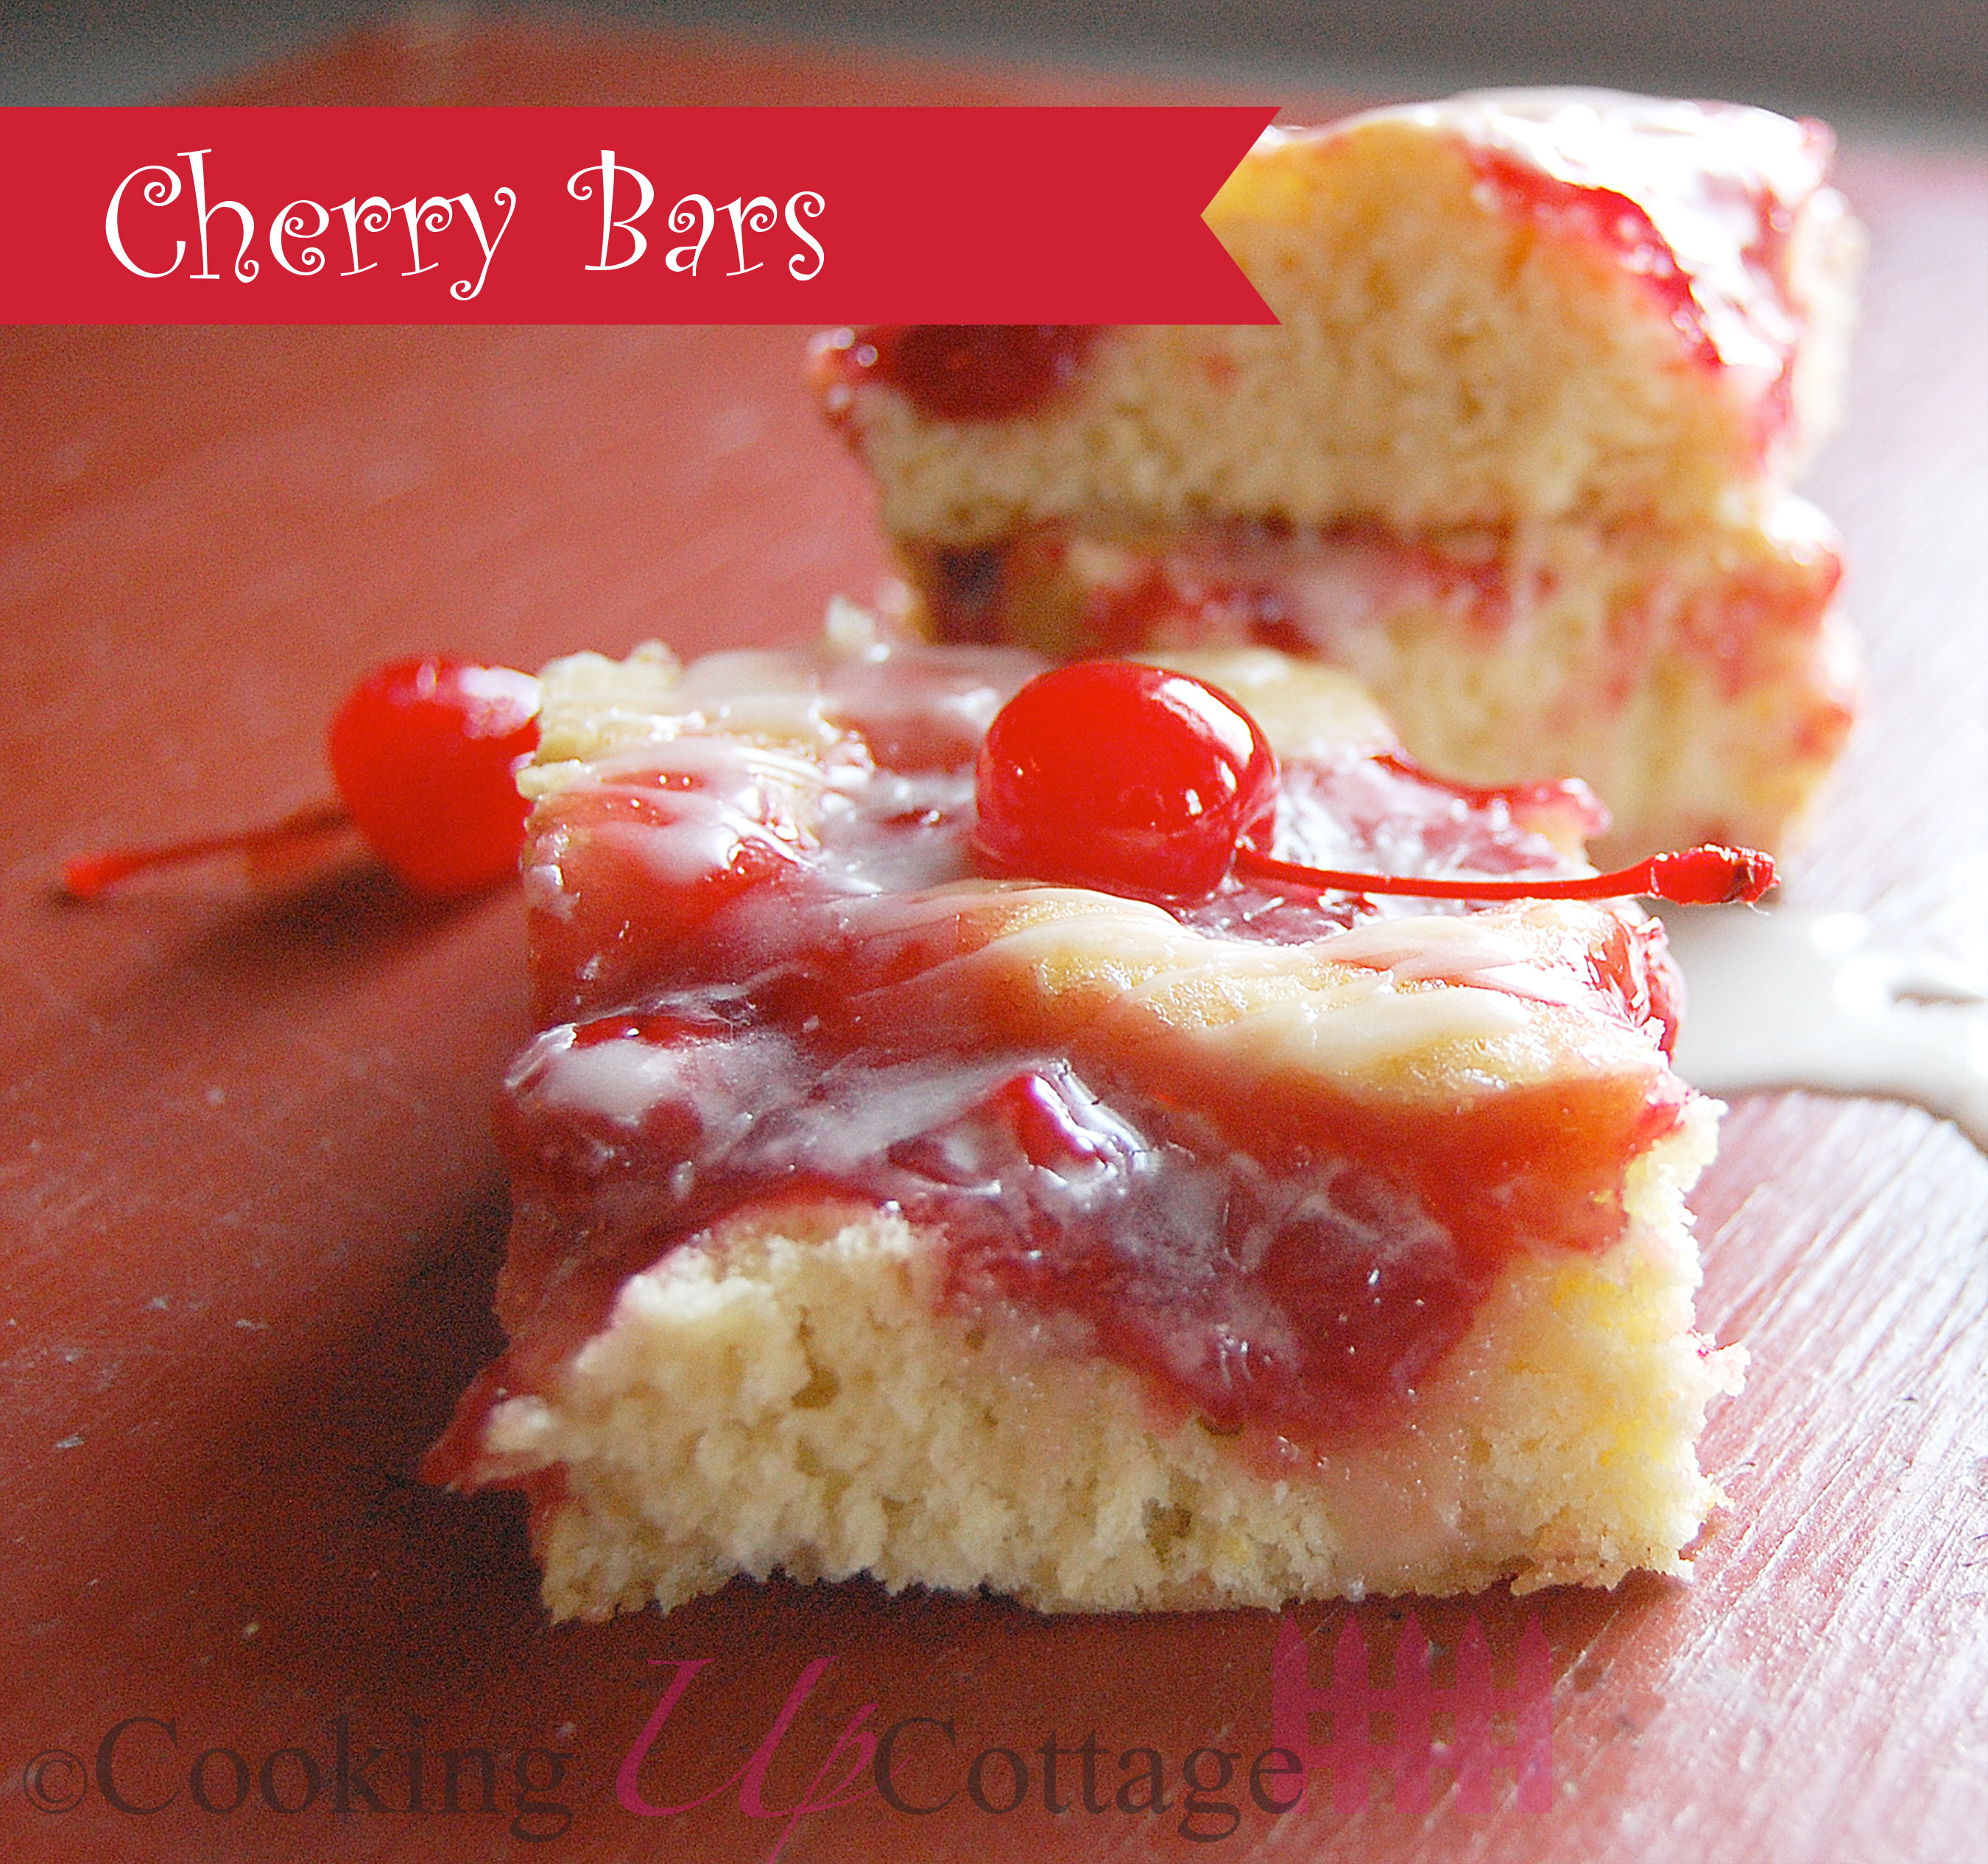 Cherry Bars Cooking Up Cottage